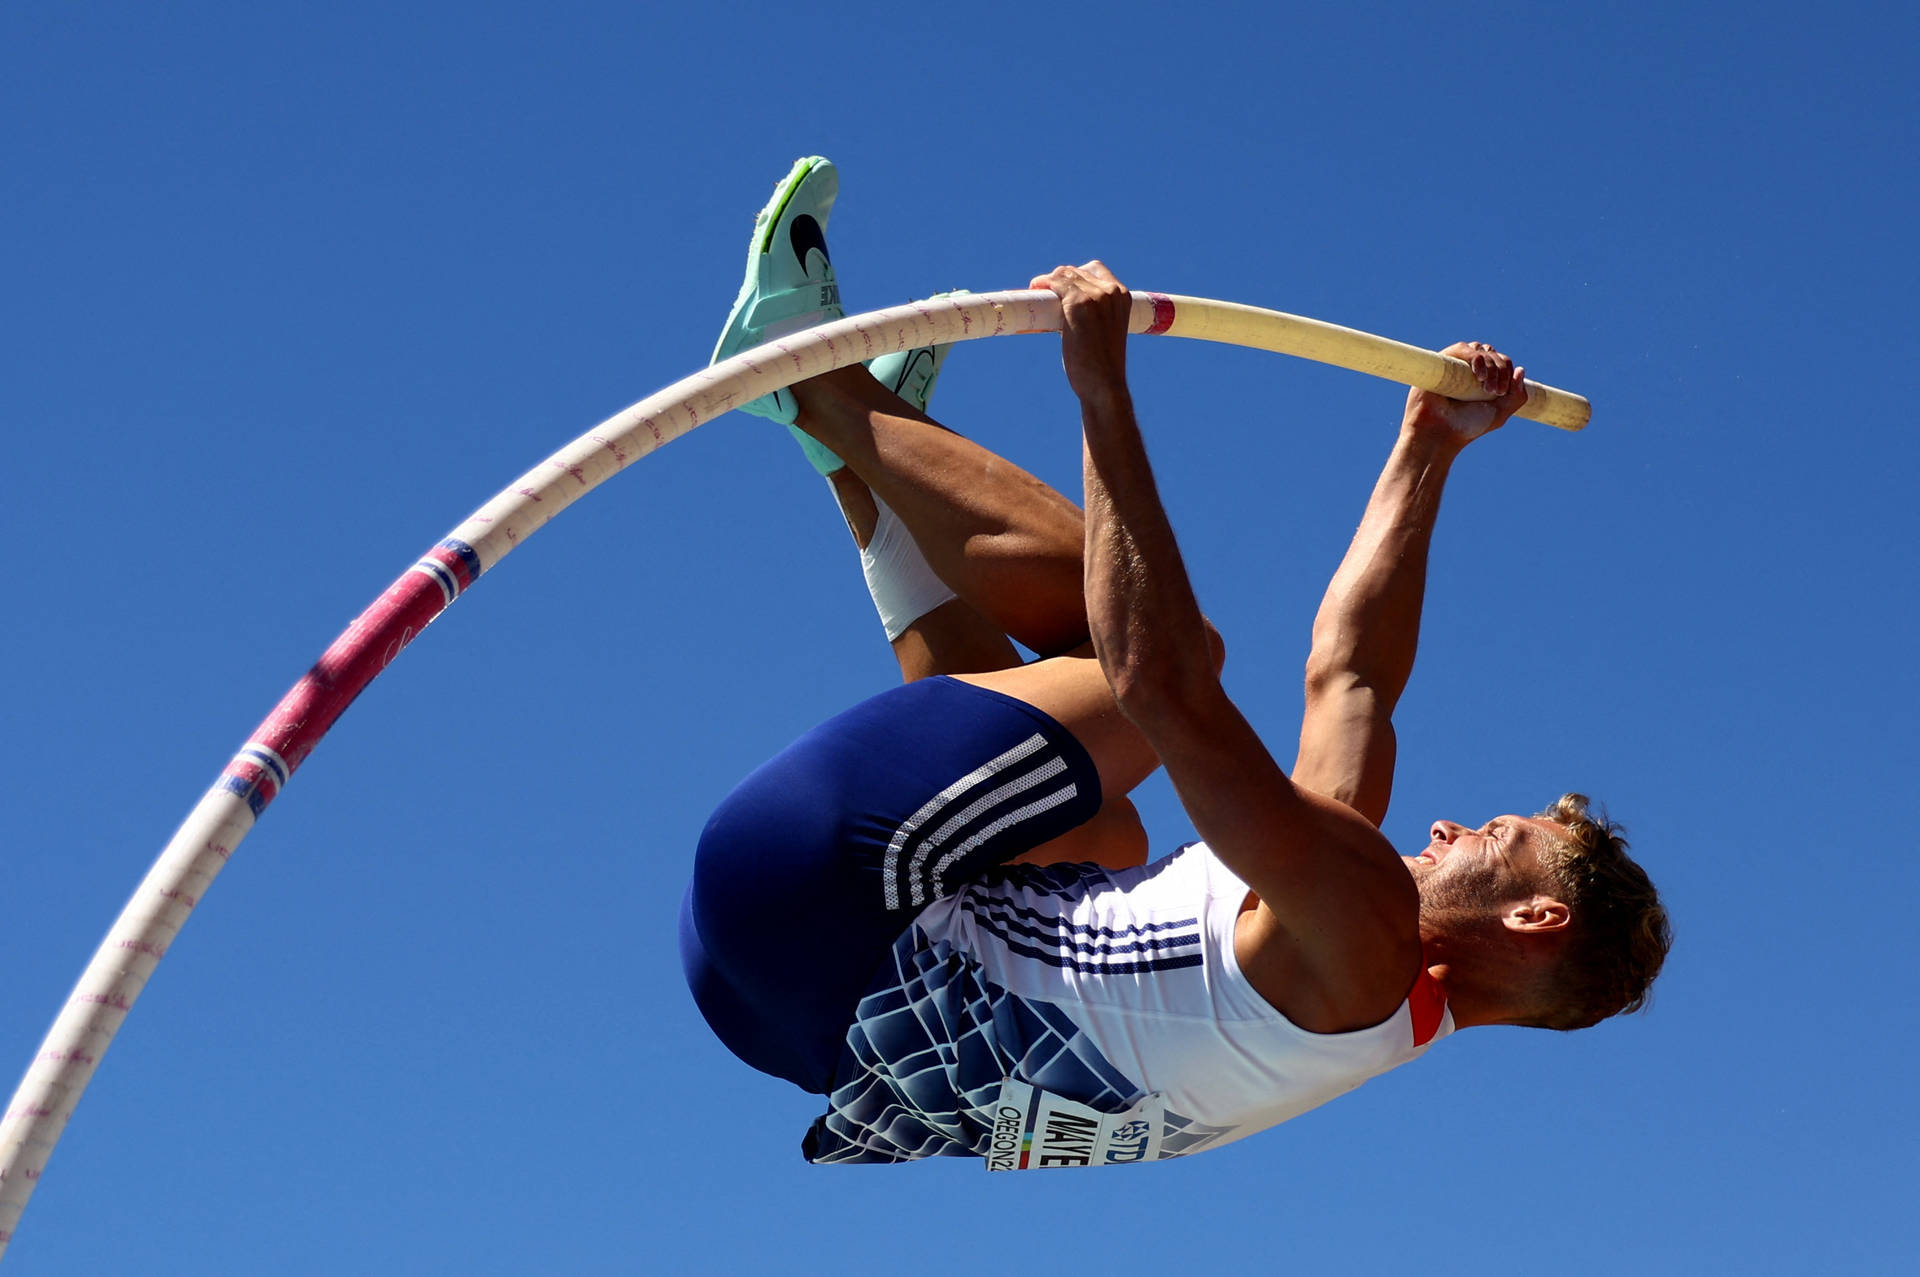 Kevin Mayer French Pole Vault Athlete